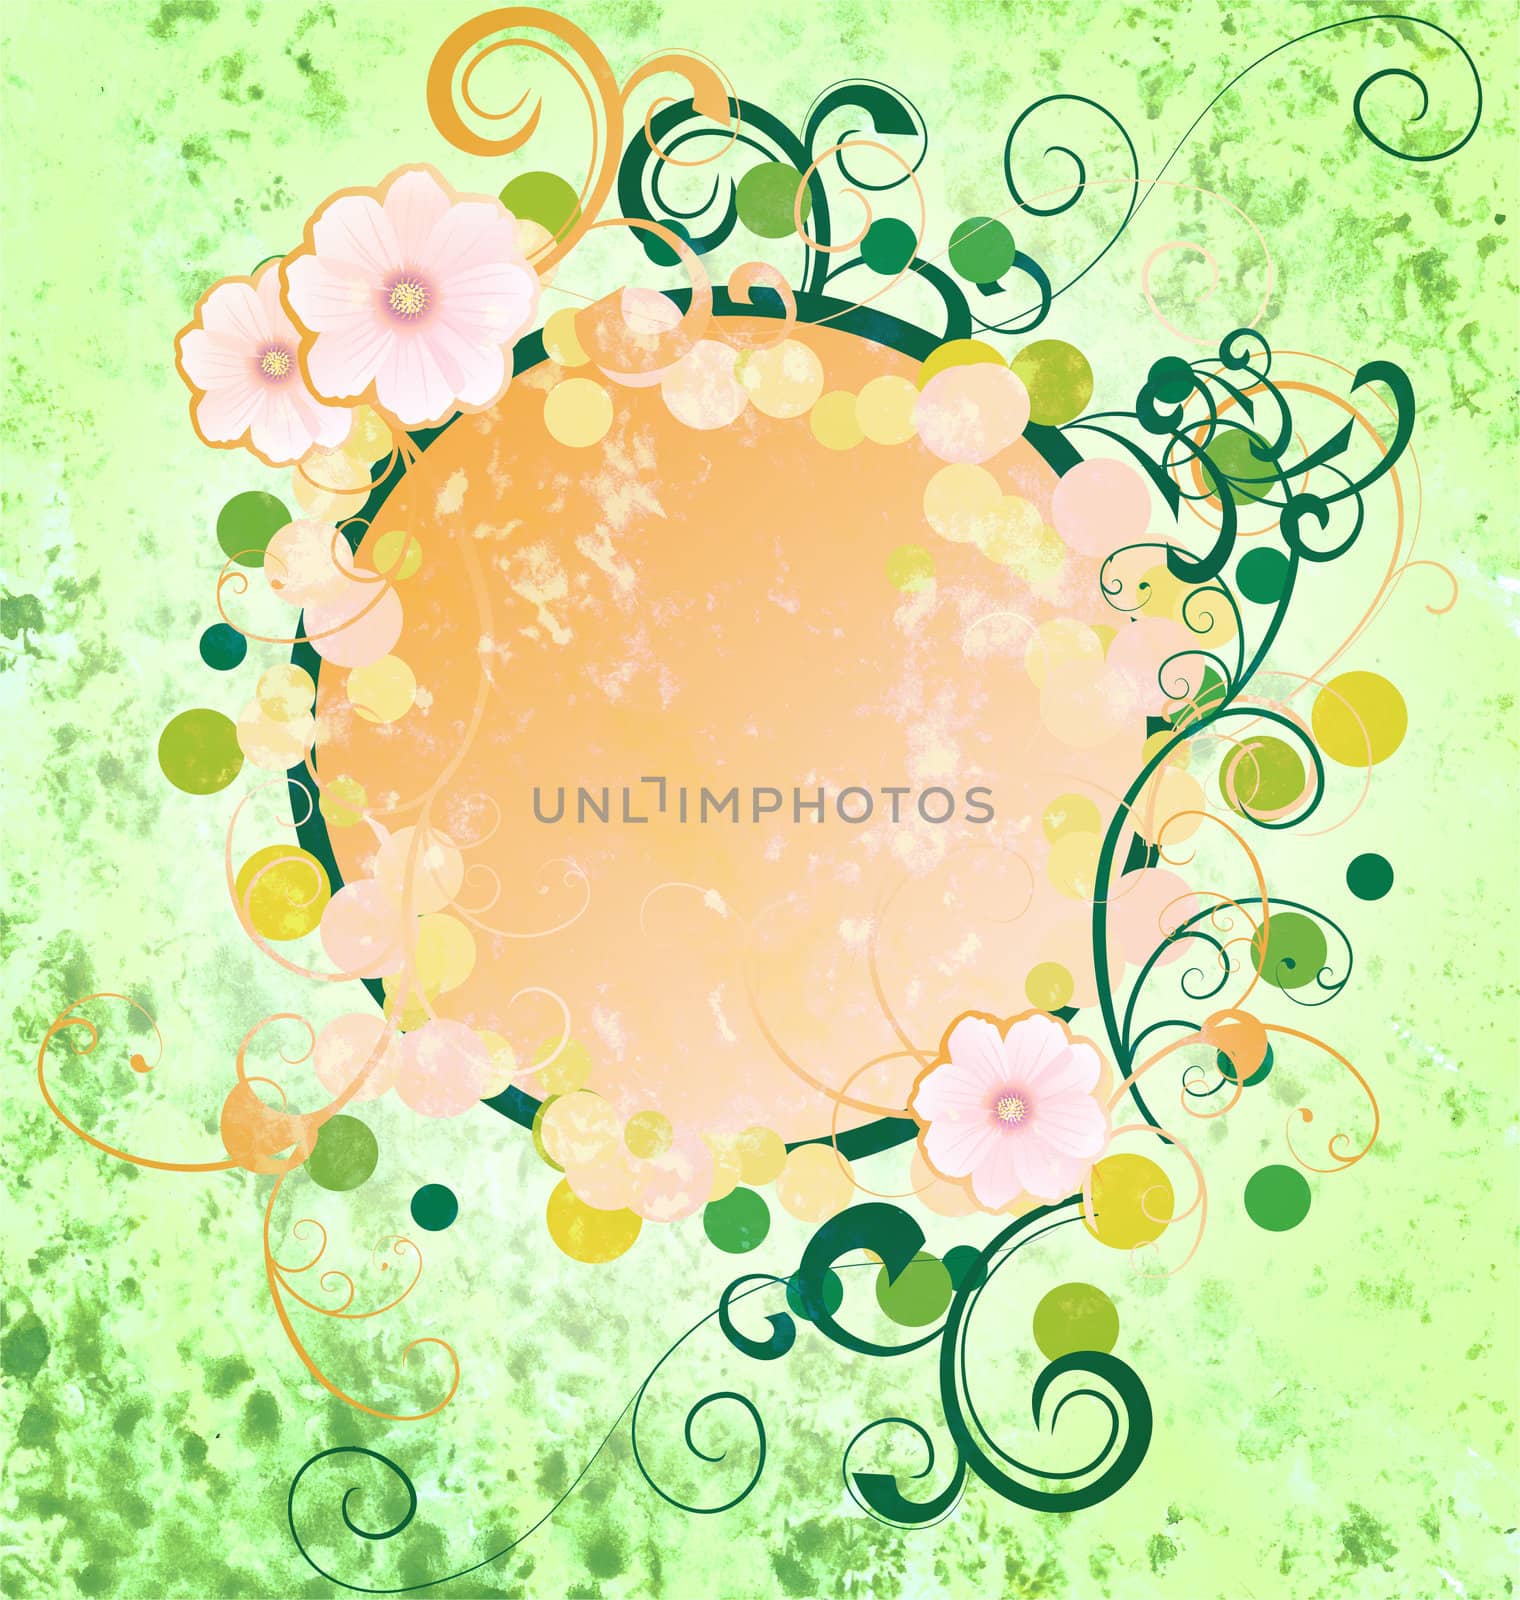 grunge green spring frame with cosmos flowers and flourishes holidays idea